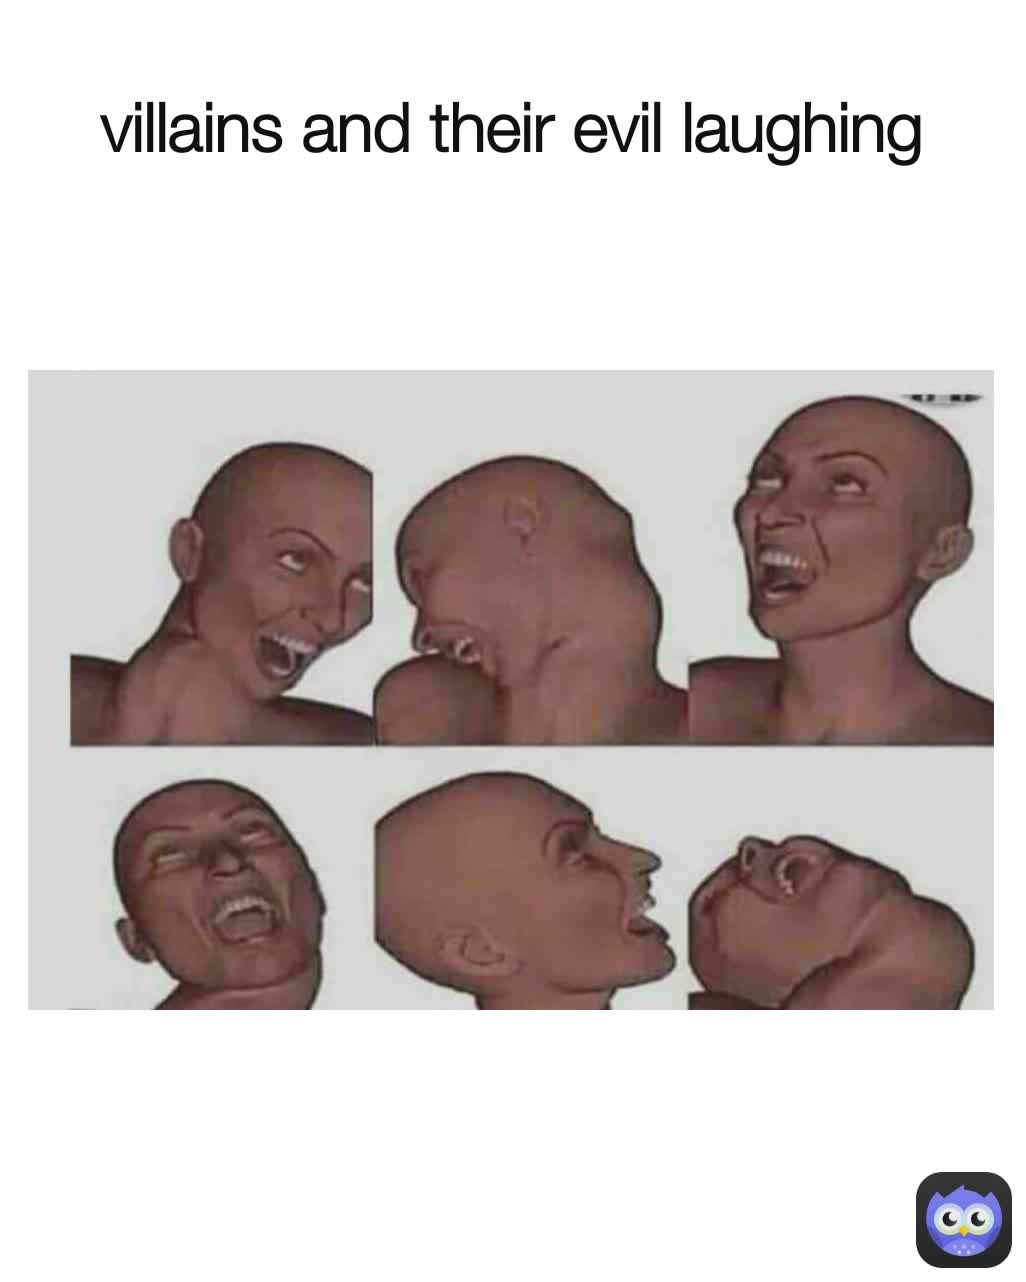 villains and their evil laughing